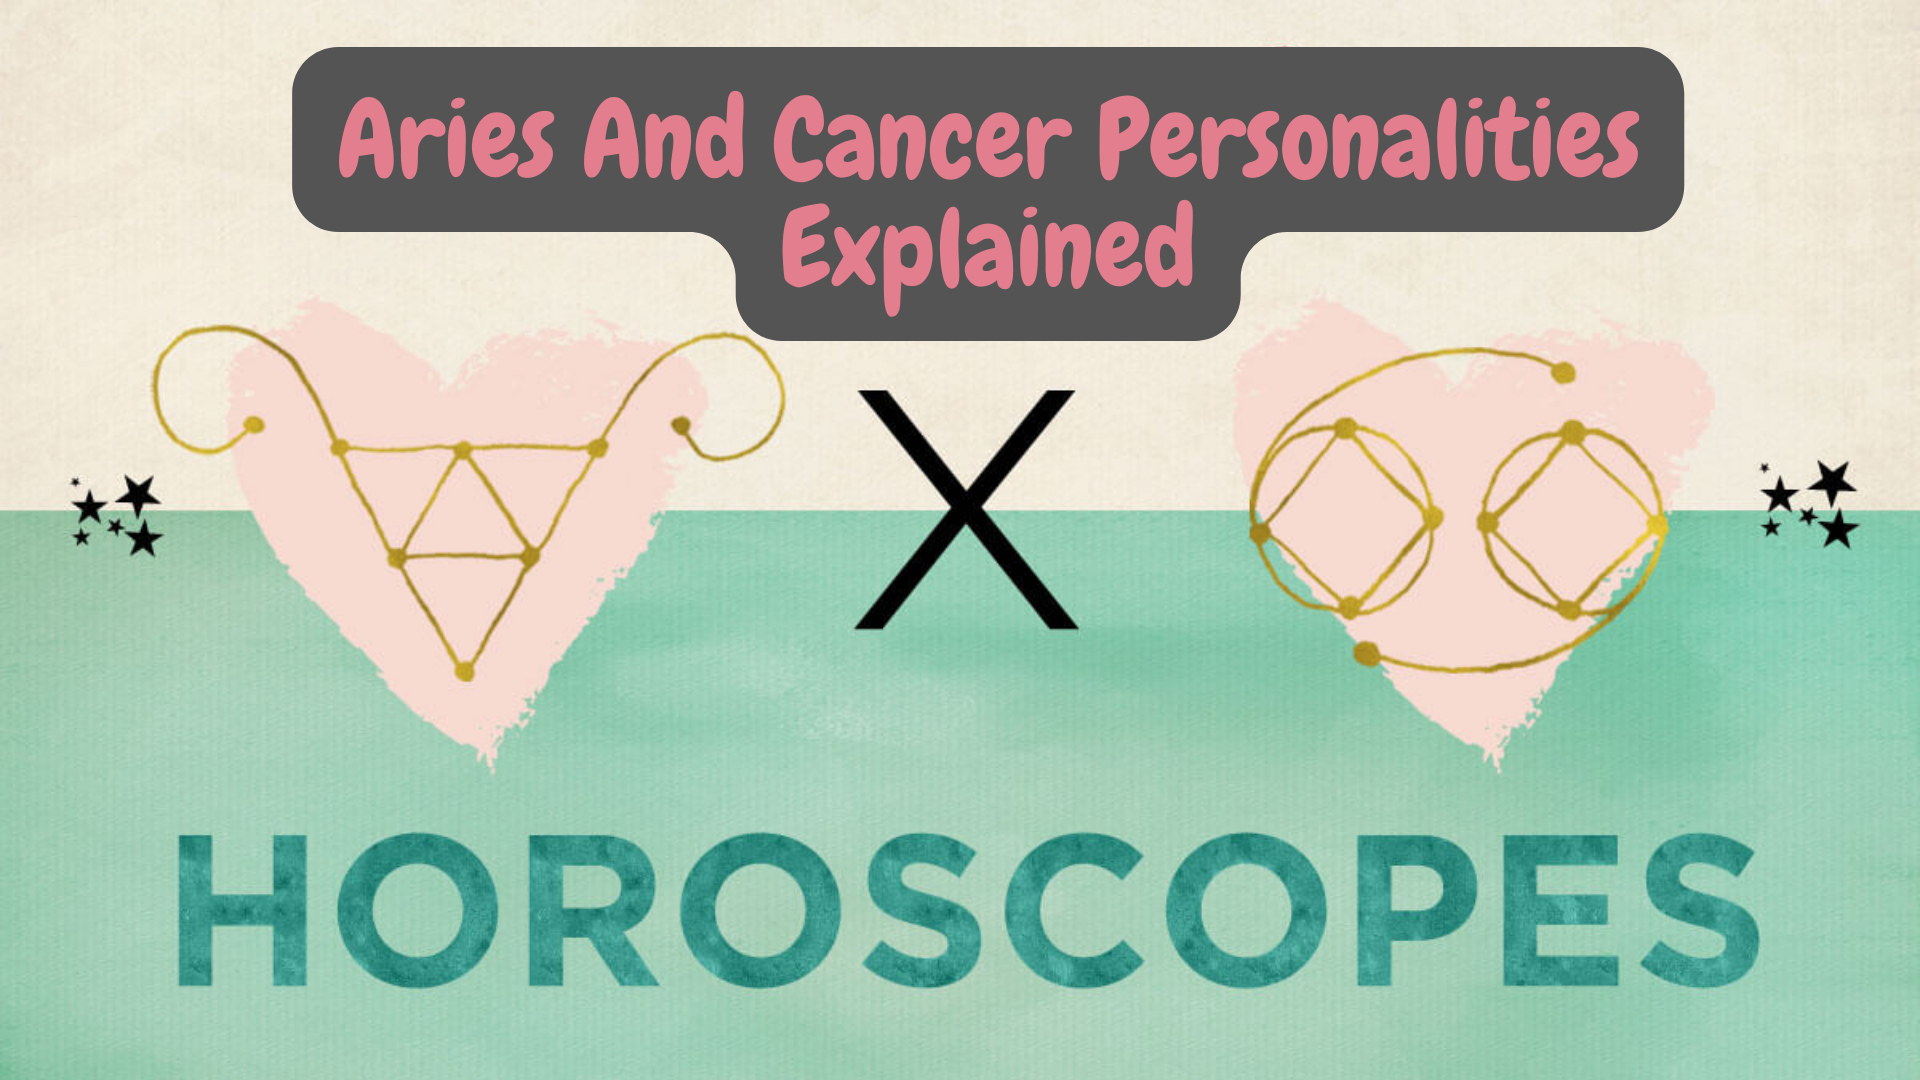 Aries and Cancer sign with words Aries And Cancer Personalities Explained Horoscope